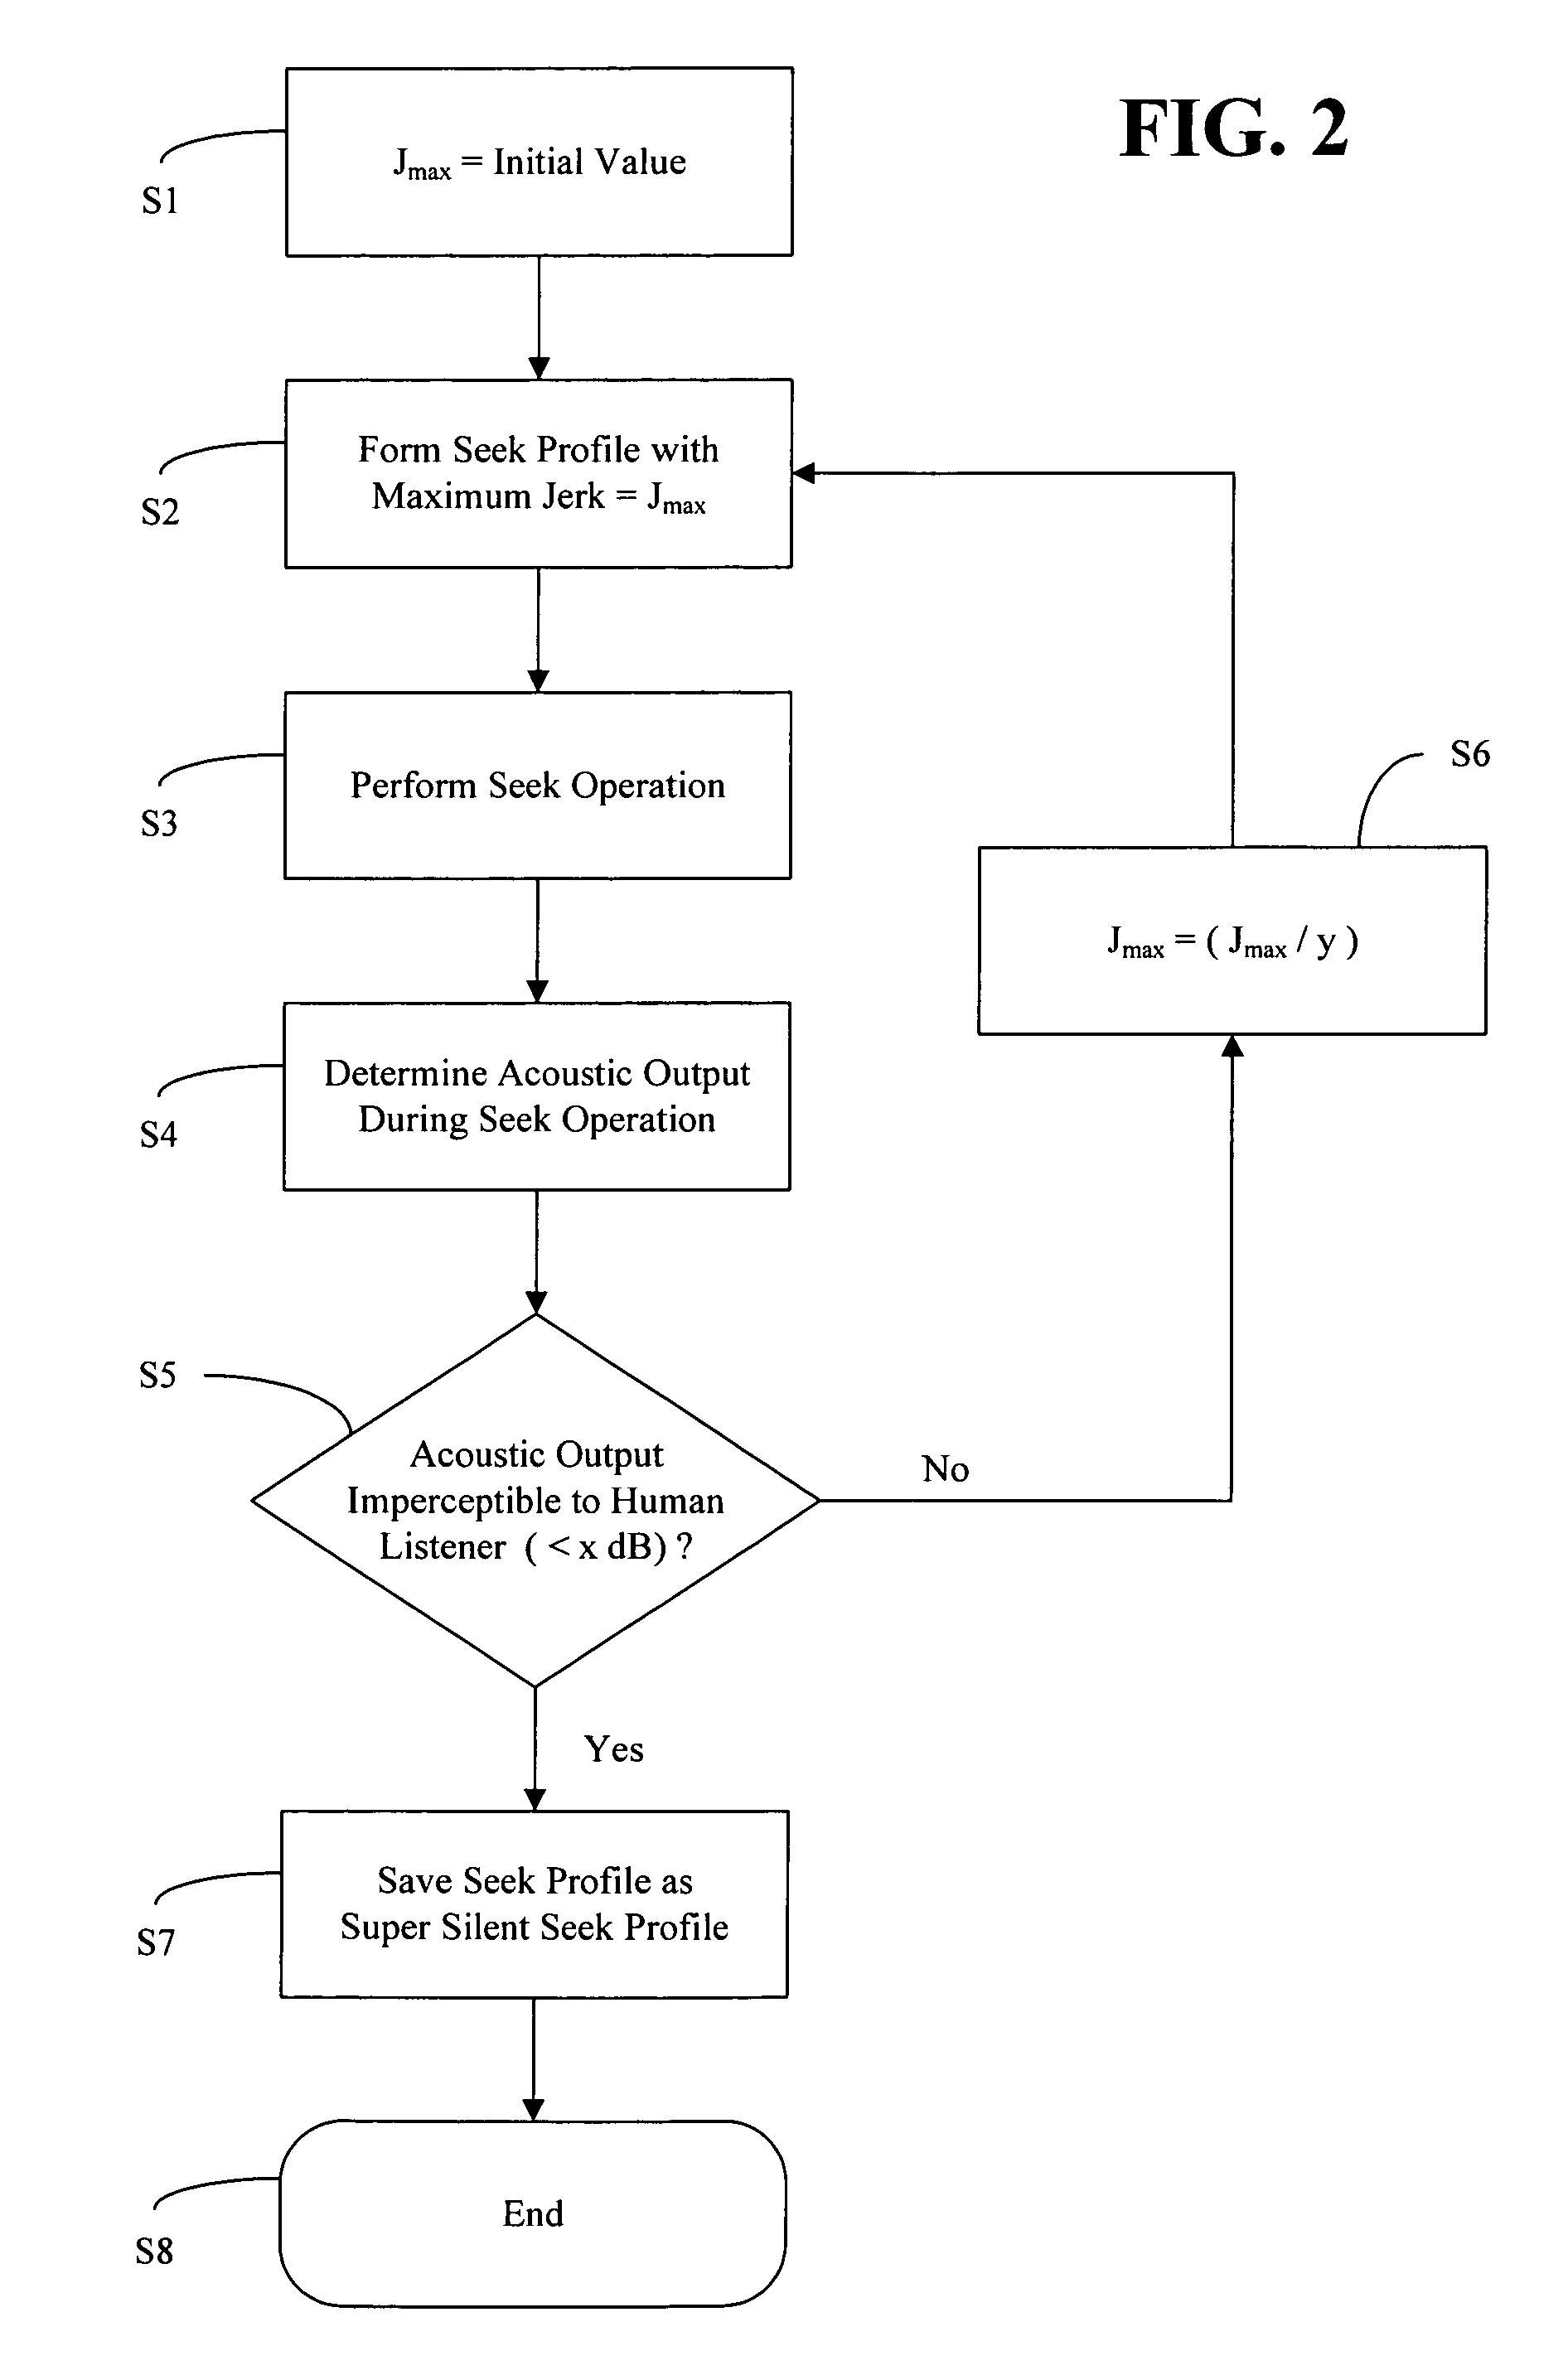 Disk drives and methods allowing for super silent seeks